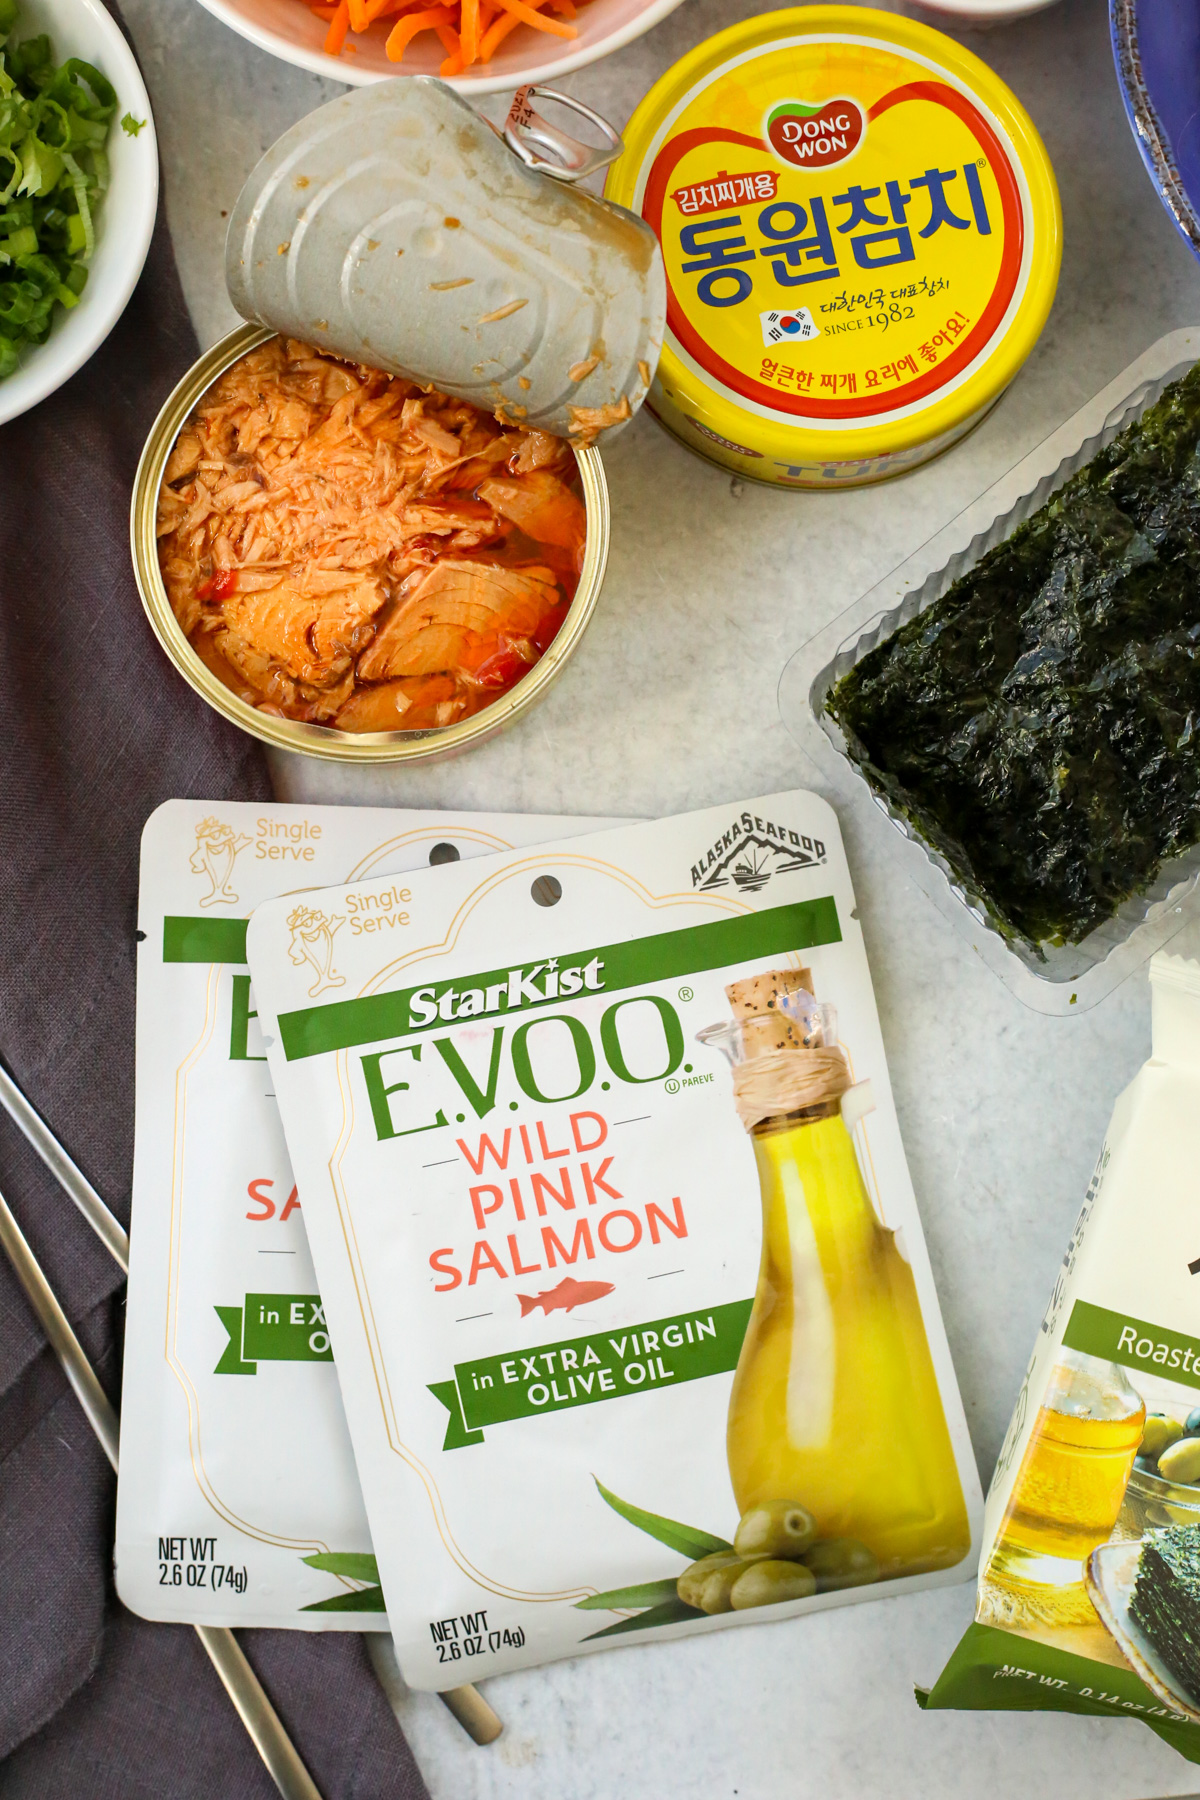 An open can of Korean style tuna is arranged next to two unopened pouches of Starkest Salmon packed in extra virgin olive oil, displayed on a kitchen countertop with a pair of silver chopsticks